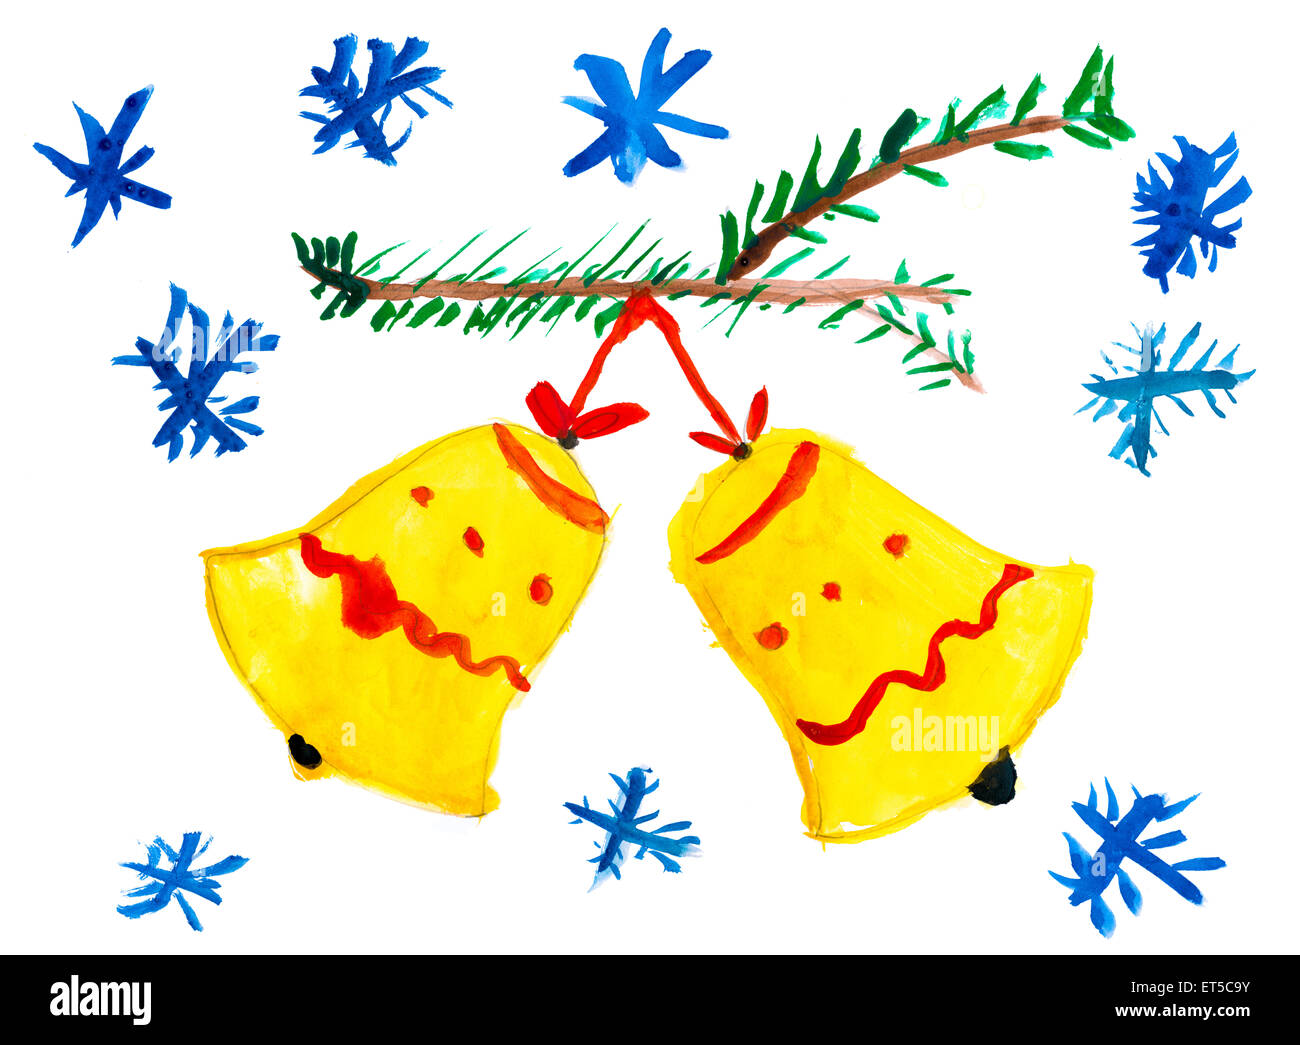 How to Draw Jingle Bells  Christmas bells drawing, Christmas bells,  Christmas crafts kids ornaments